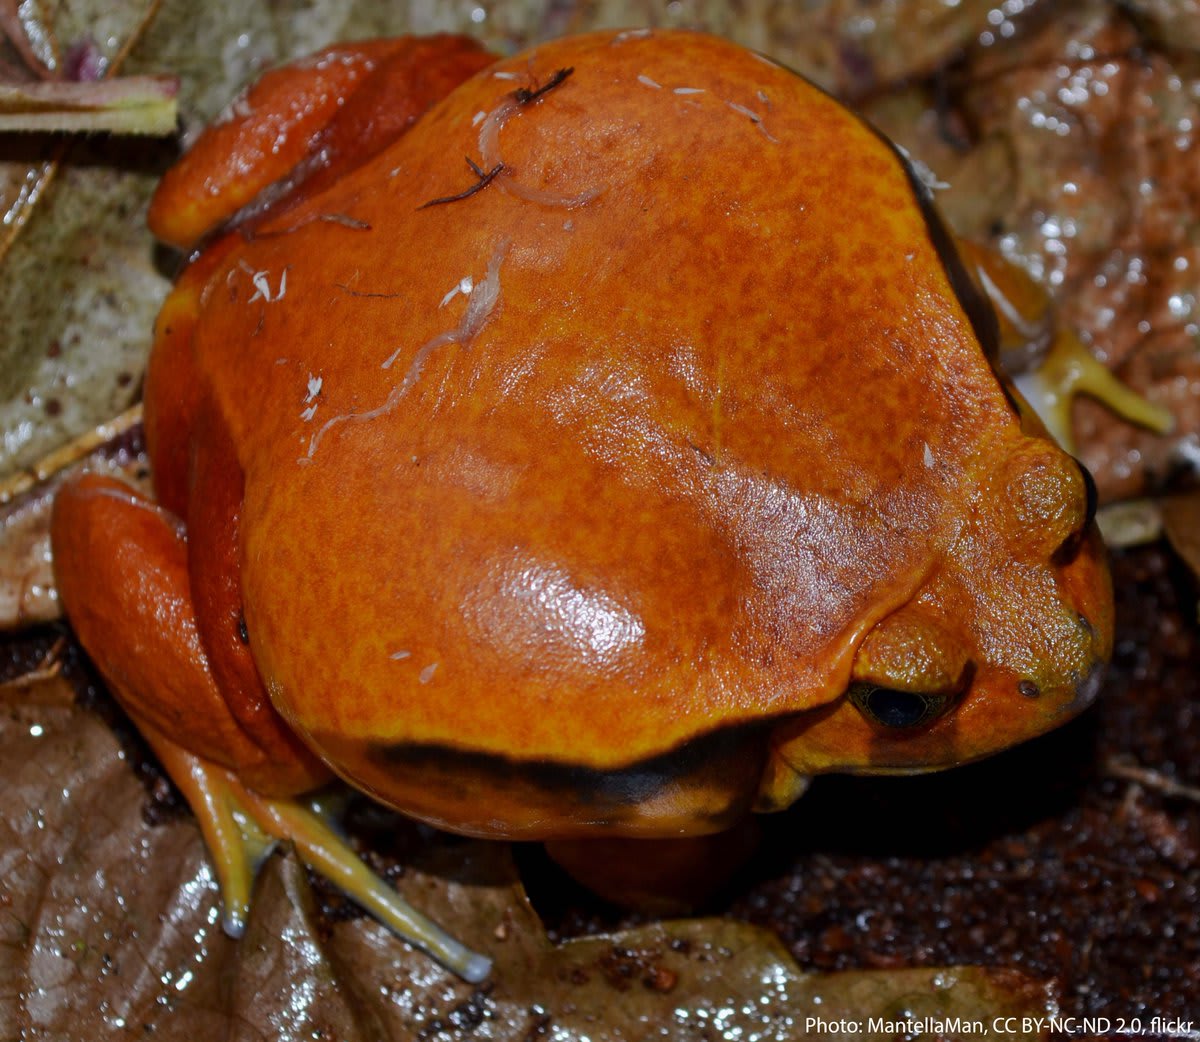 Summer is tomato season–& we’ve got a “tomato” for you to enjoy! Meet the Sambava tomato frog. Its bright coloring warns others about its toxicity; when threatened, it secretes a milky toxic substance to ward off foes. It lives in Madagascar where it munches insects & worms.🍅🐸